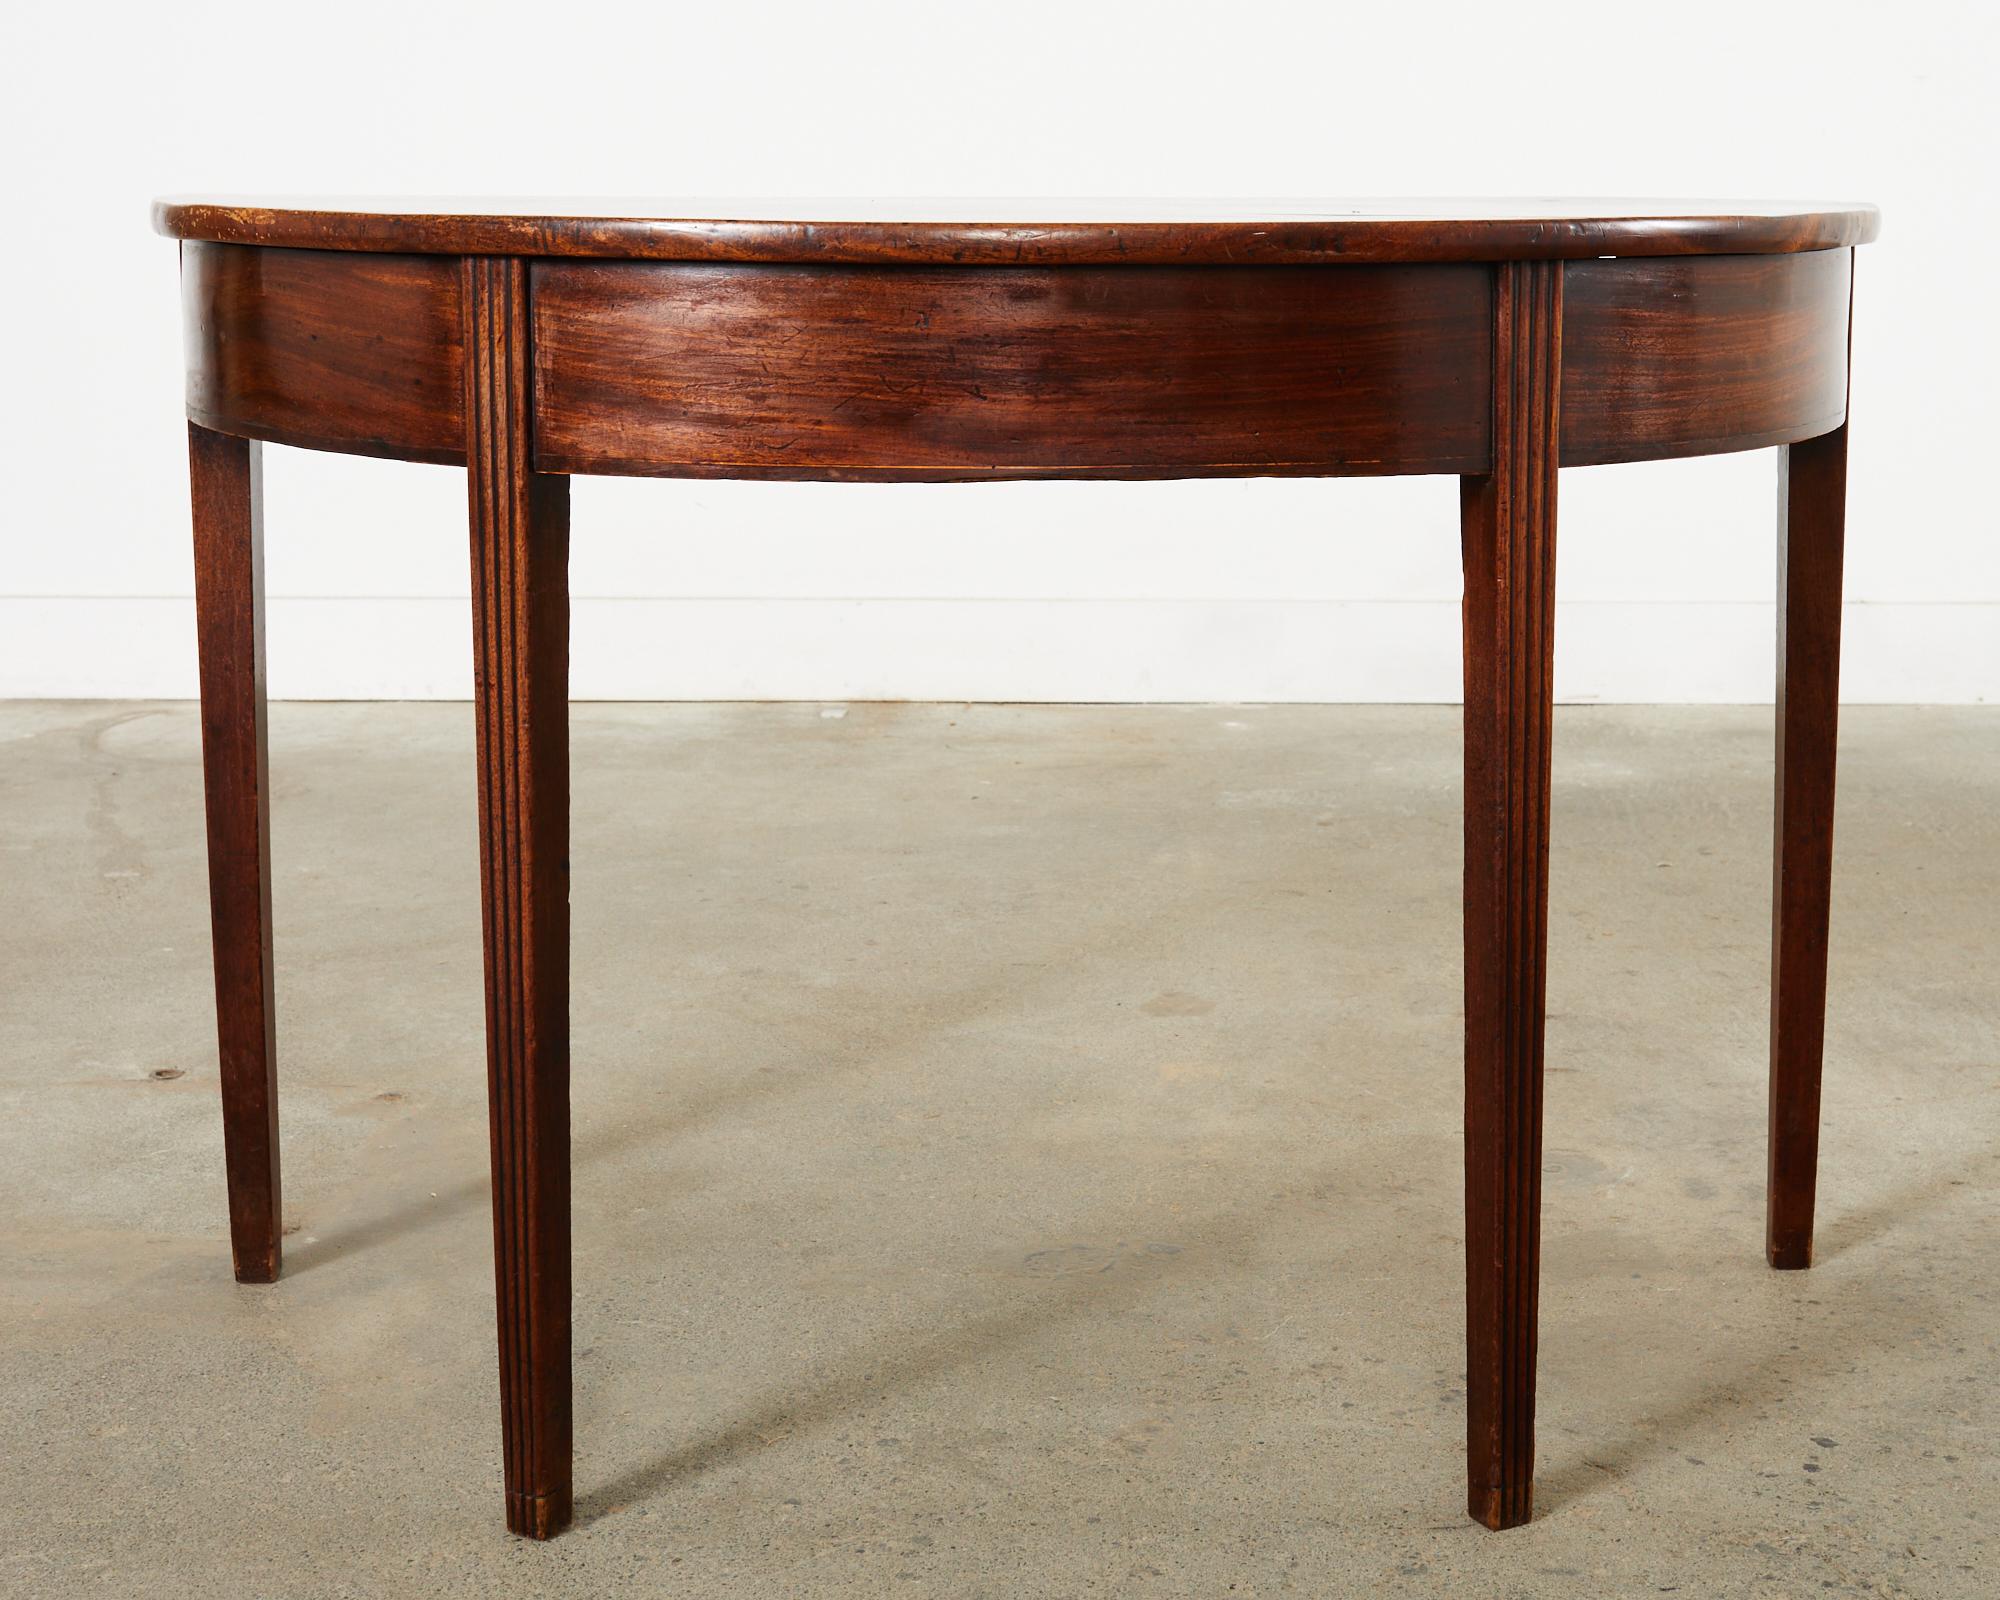 Hand-Crafted Pair of 19th Century Georgian Mahogany Demilune Console Tables